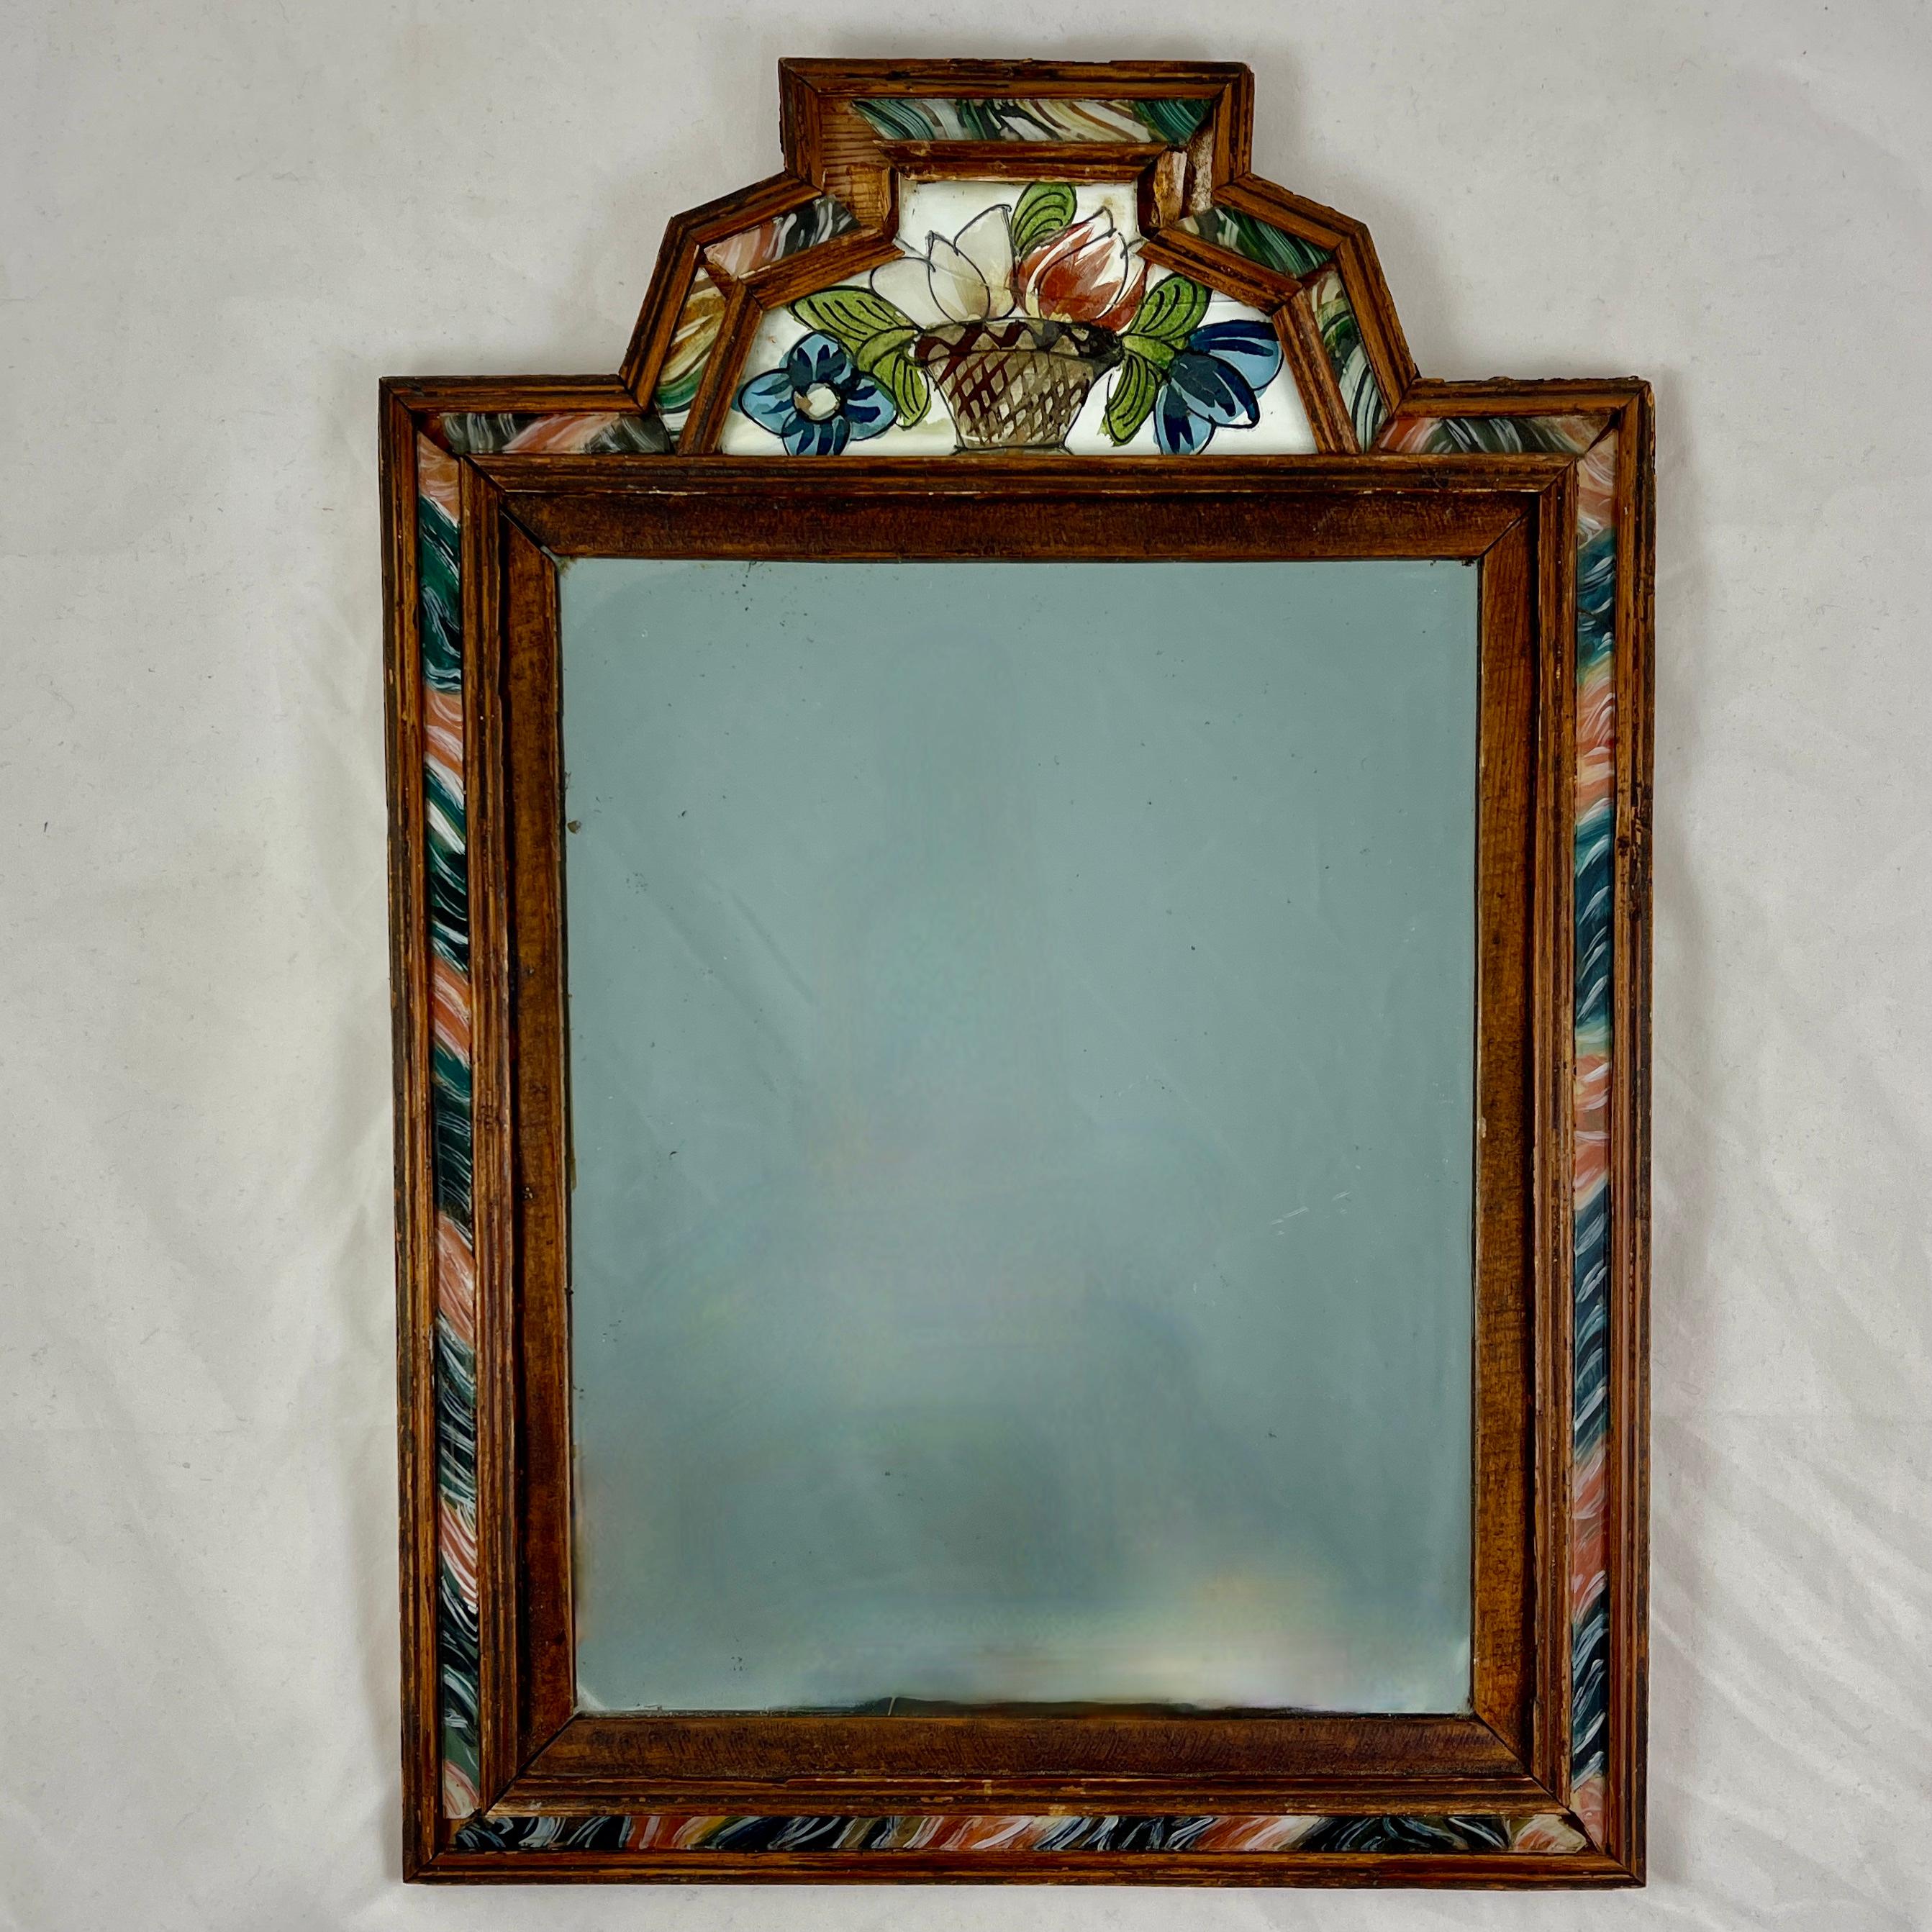 Unknown Reverse Painted Marbleized Glass & Wood Floral Crest Courting Mirrors, a pair